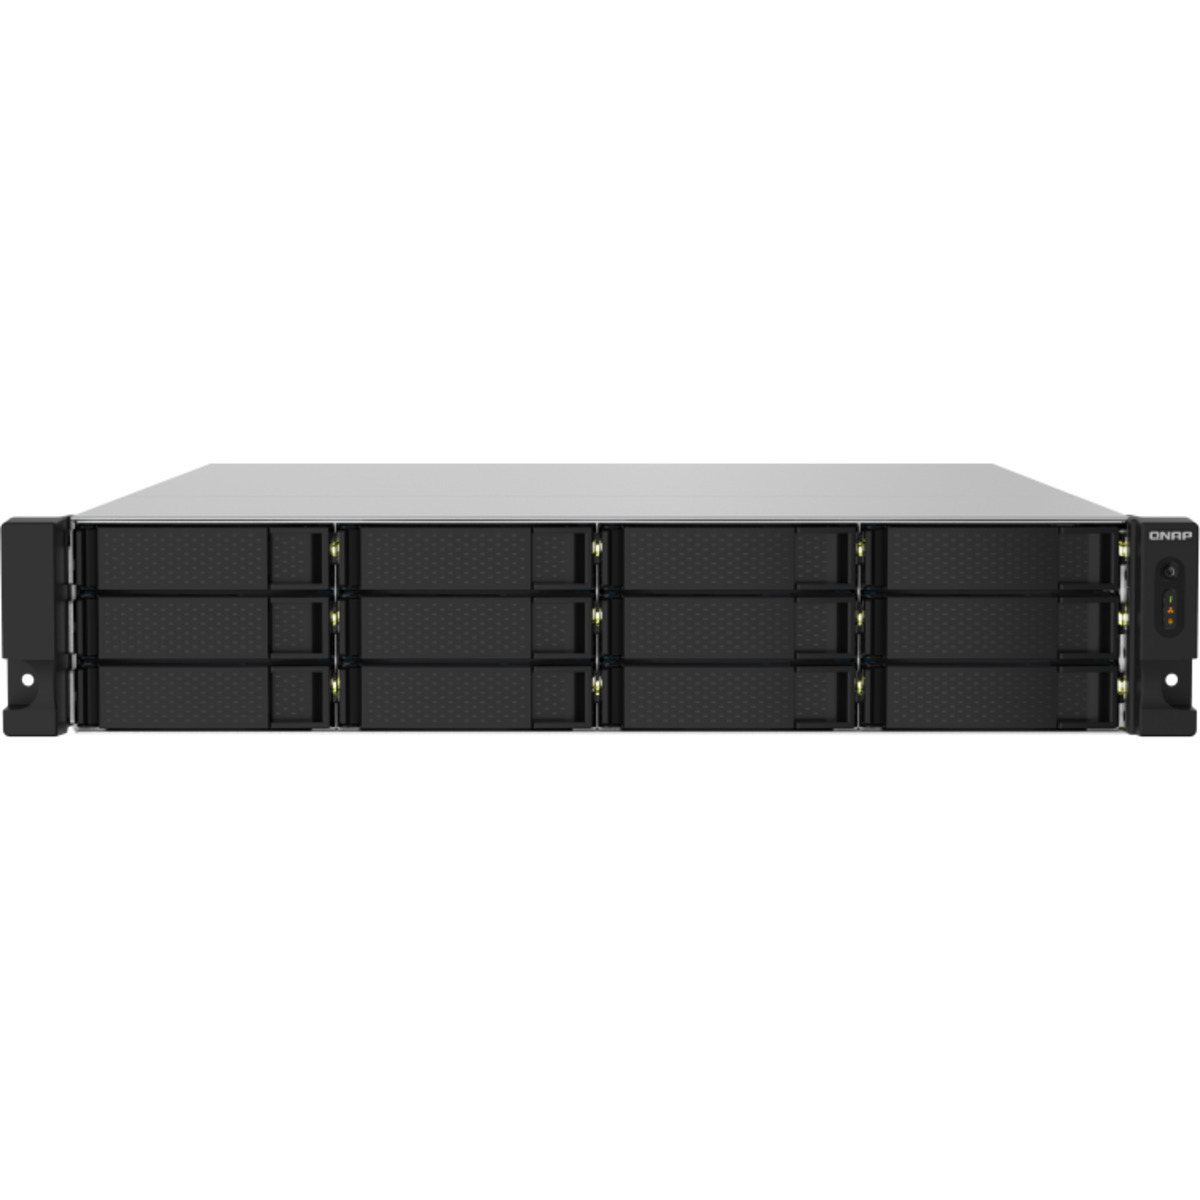 buy QNAP TS-1232PXU-RP RackMount NAS - Network Attached Storage Device Burn-In Tested Configurations - FREE RAM UPGRADE - nas headquarters buy network attached storage server device das new raid-5 free shipping usa TS-1232PXU-RP